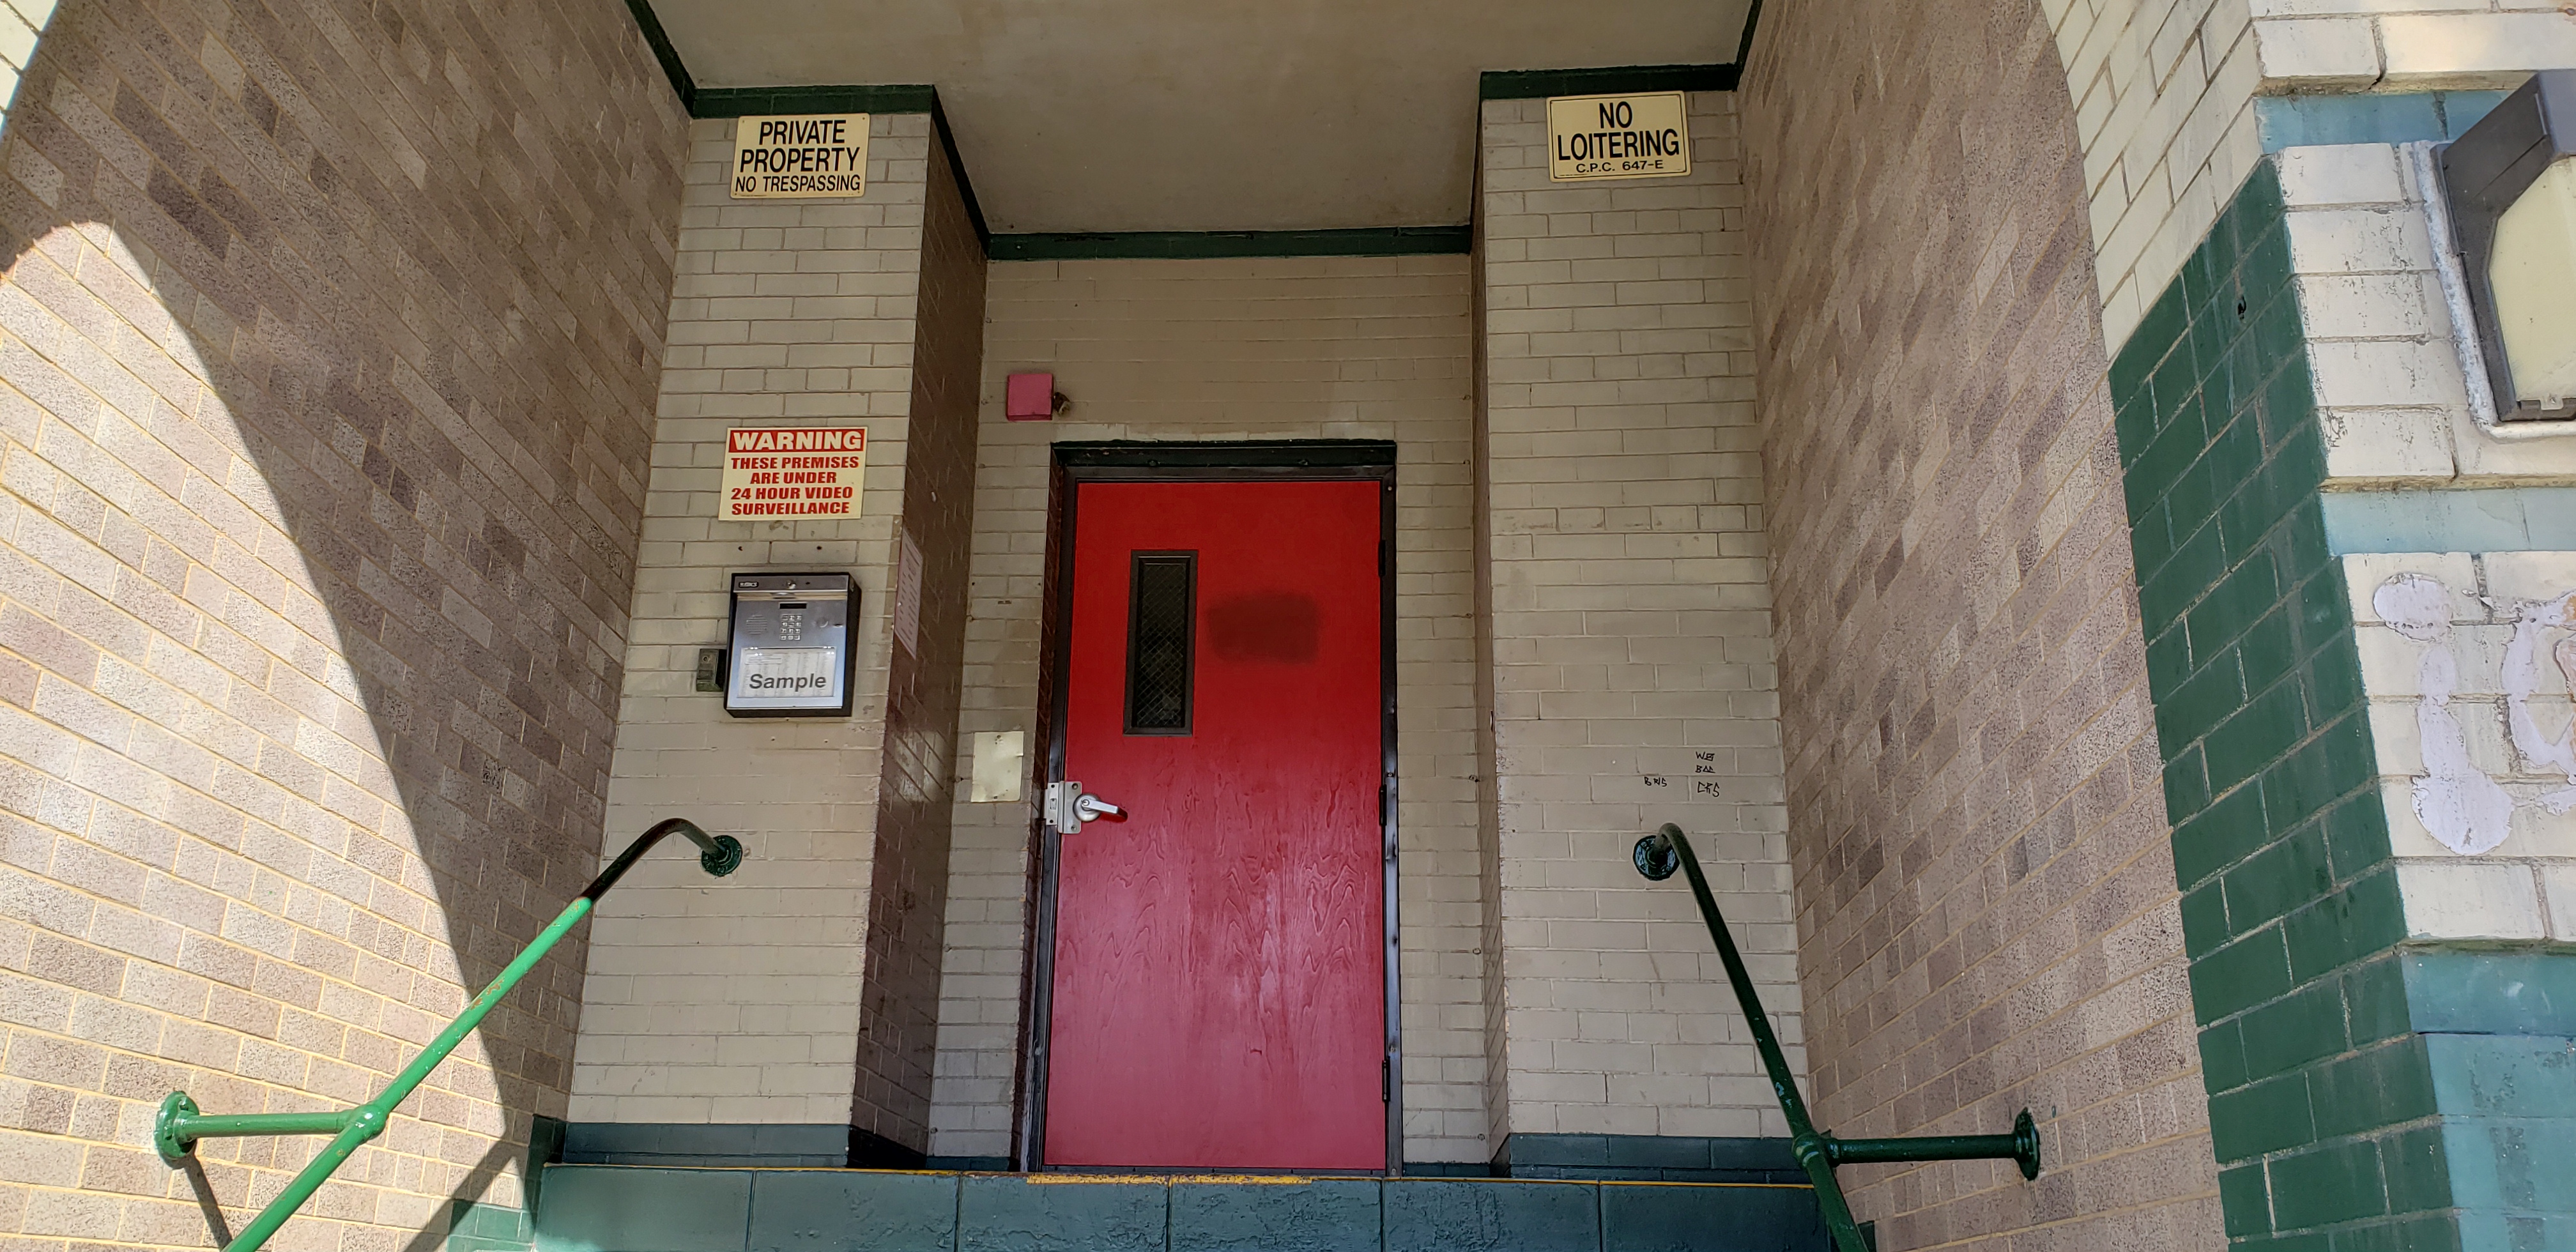 A close up view of the red entrance door to Reno Apartments with brown/stone colored stairs leading up to it.